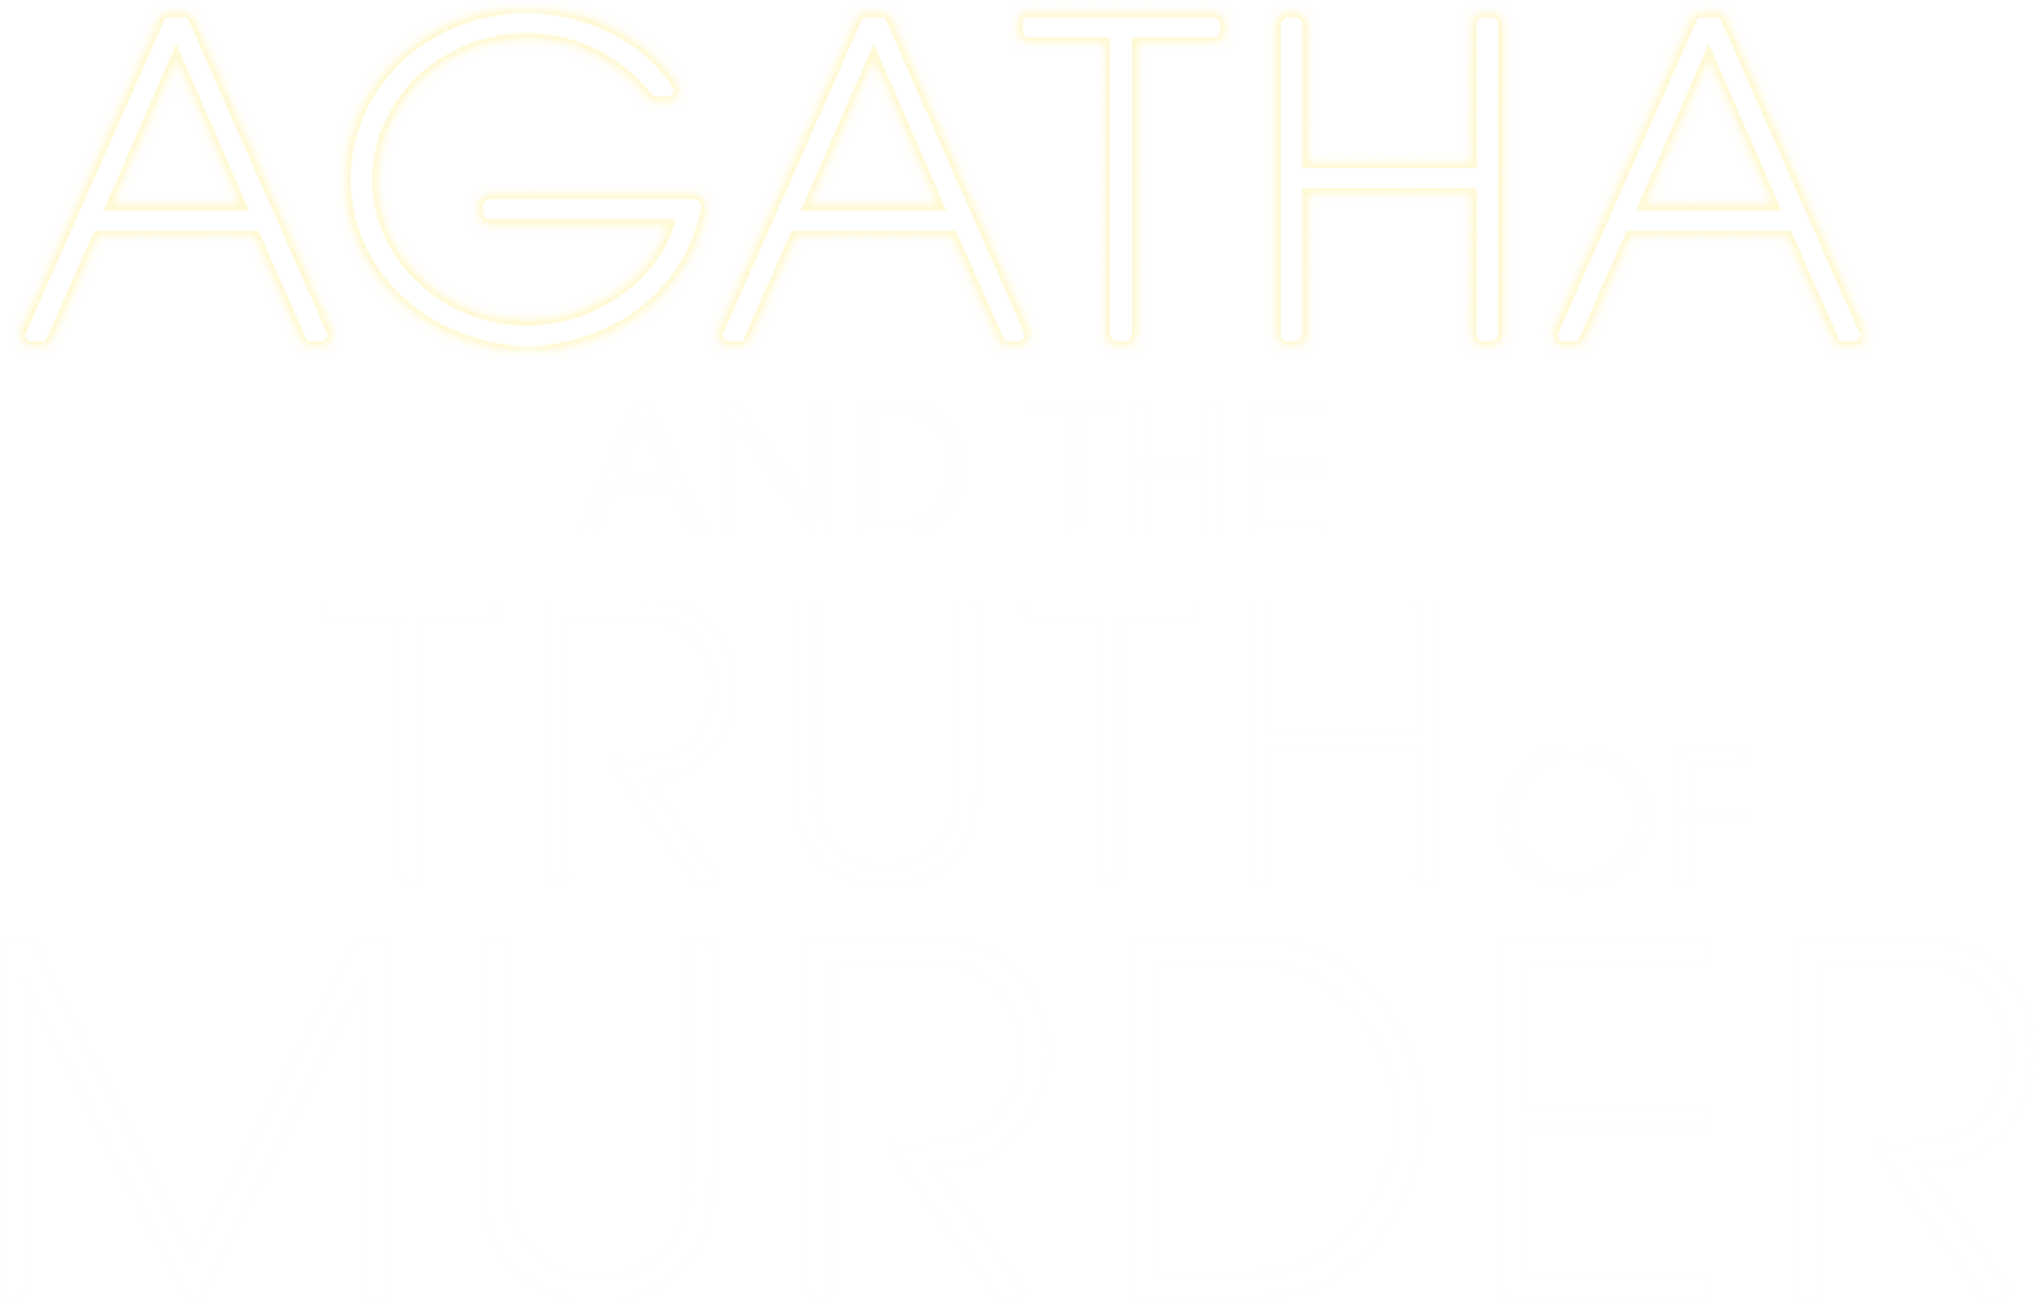 Agatha and the Truth of Murder logo